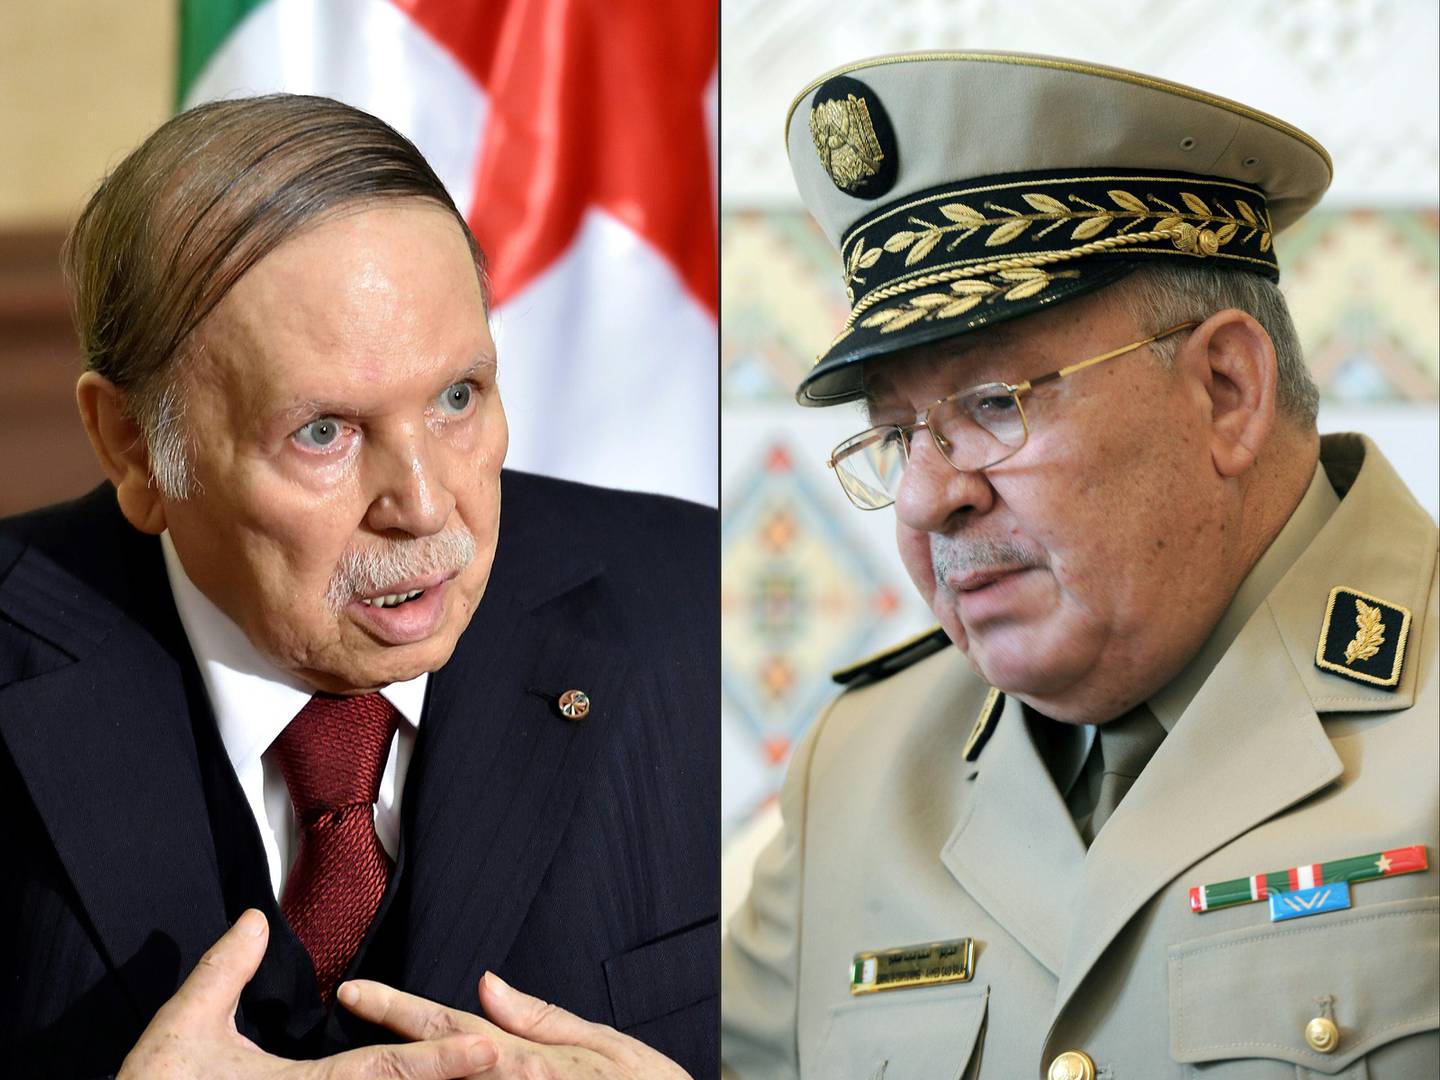 (COMBO) This combination of pictures created on March 26, 2019 shows
Algerian President Abdelaziz Bouteflika (L) during an official visit to Zeralda, a suburb of the capital Algiers on April 10, 2016, and Algeria's Chief of Staff General Ahmed Gaid Salah at the Houari-Boumediene International Airport in Algiers, on May 20, 2014. - Algeria's chief of staff called today for Bouteflika to be declared unfit to govern, following weeks of mass protests demanding the ailing leader to step down. (Photos by Eric FEFERBERG and Farouk Batiche / AFP)